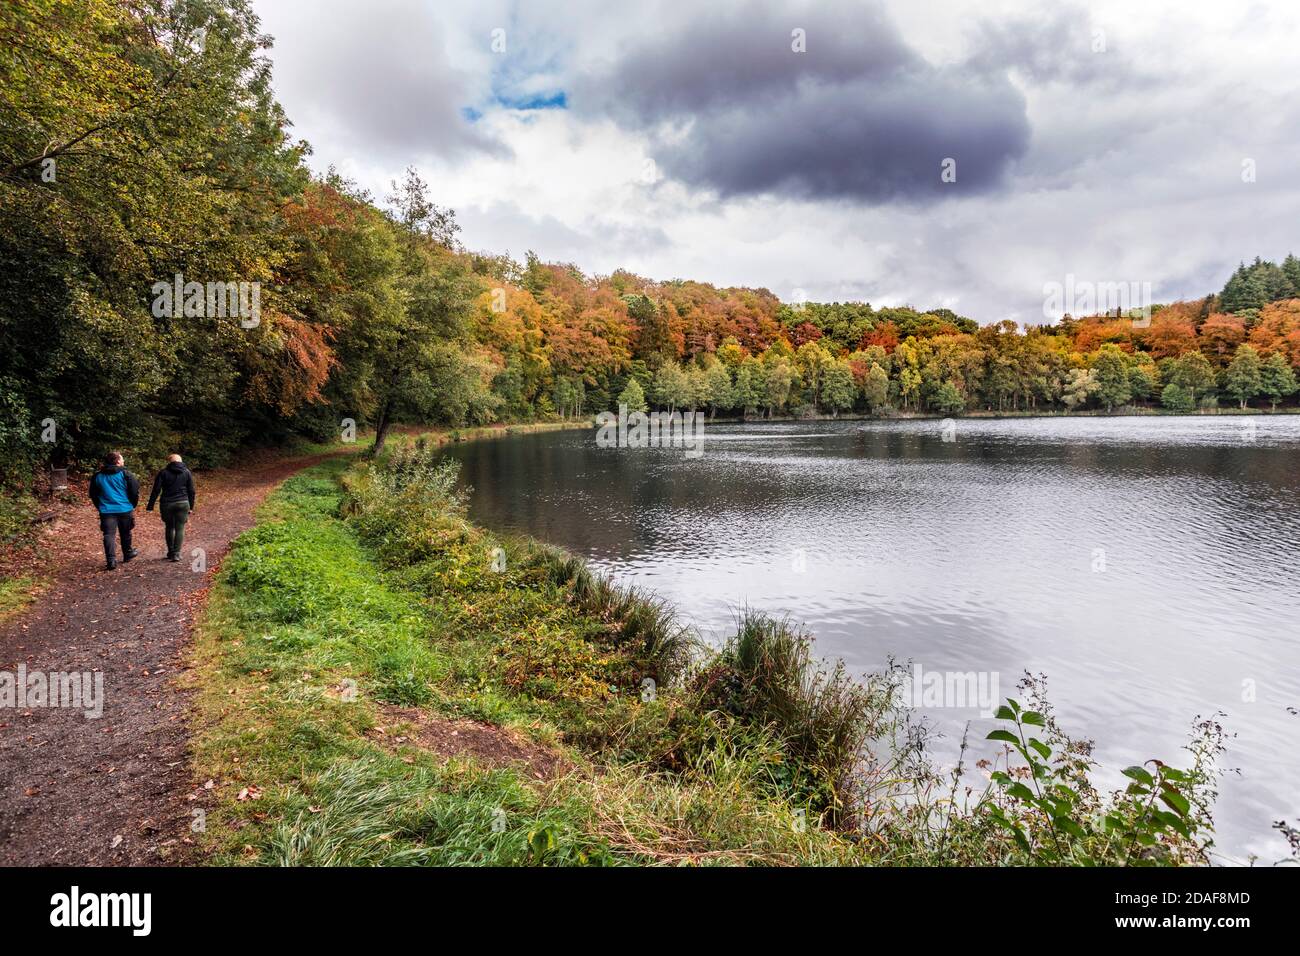 The Holzmaar lake in the Vulkaneifel almost completely surrounded by dense forest Stock Photo